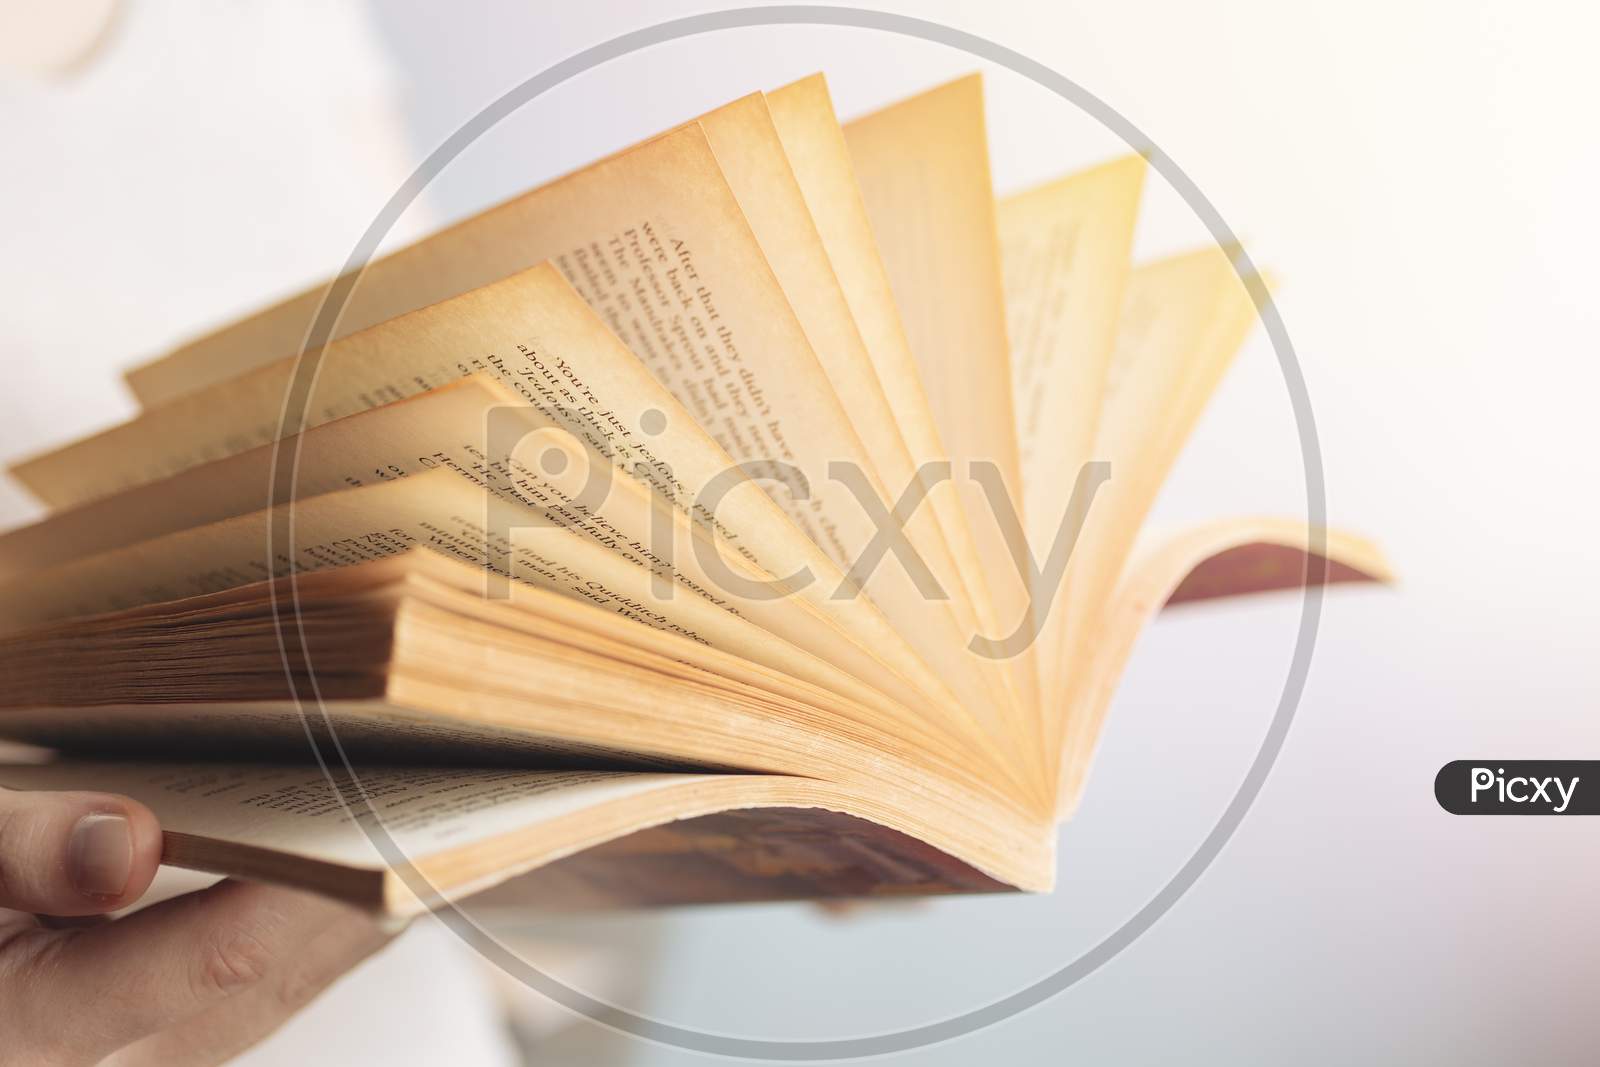 Vintage close up of an old open book with yellow pages. Avid reader, bookworm concept